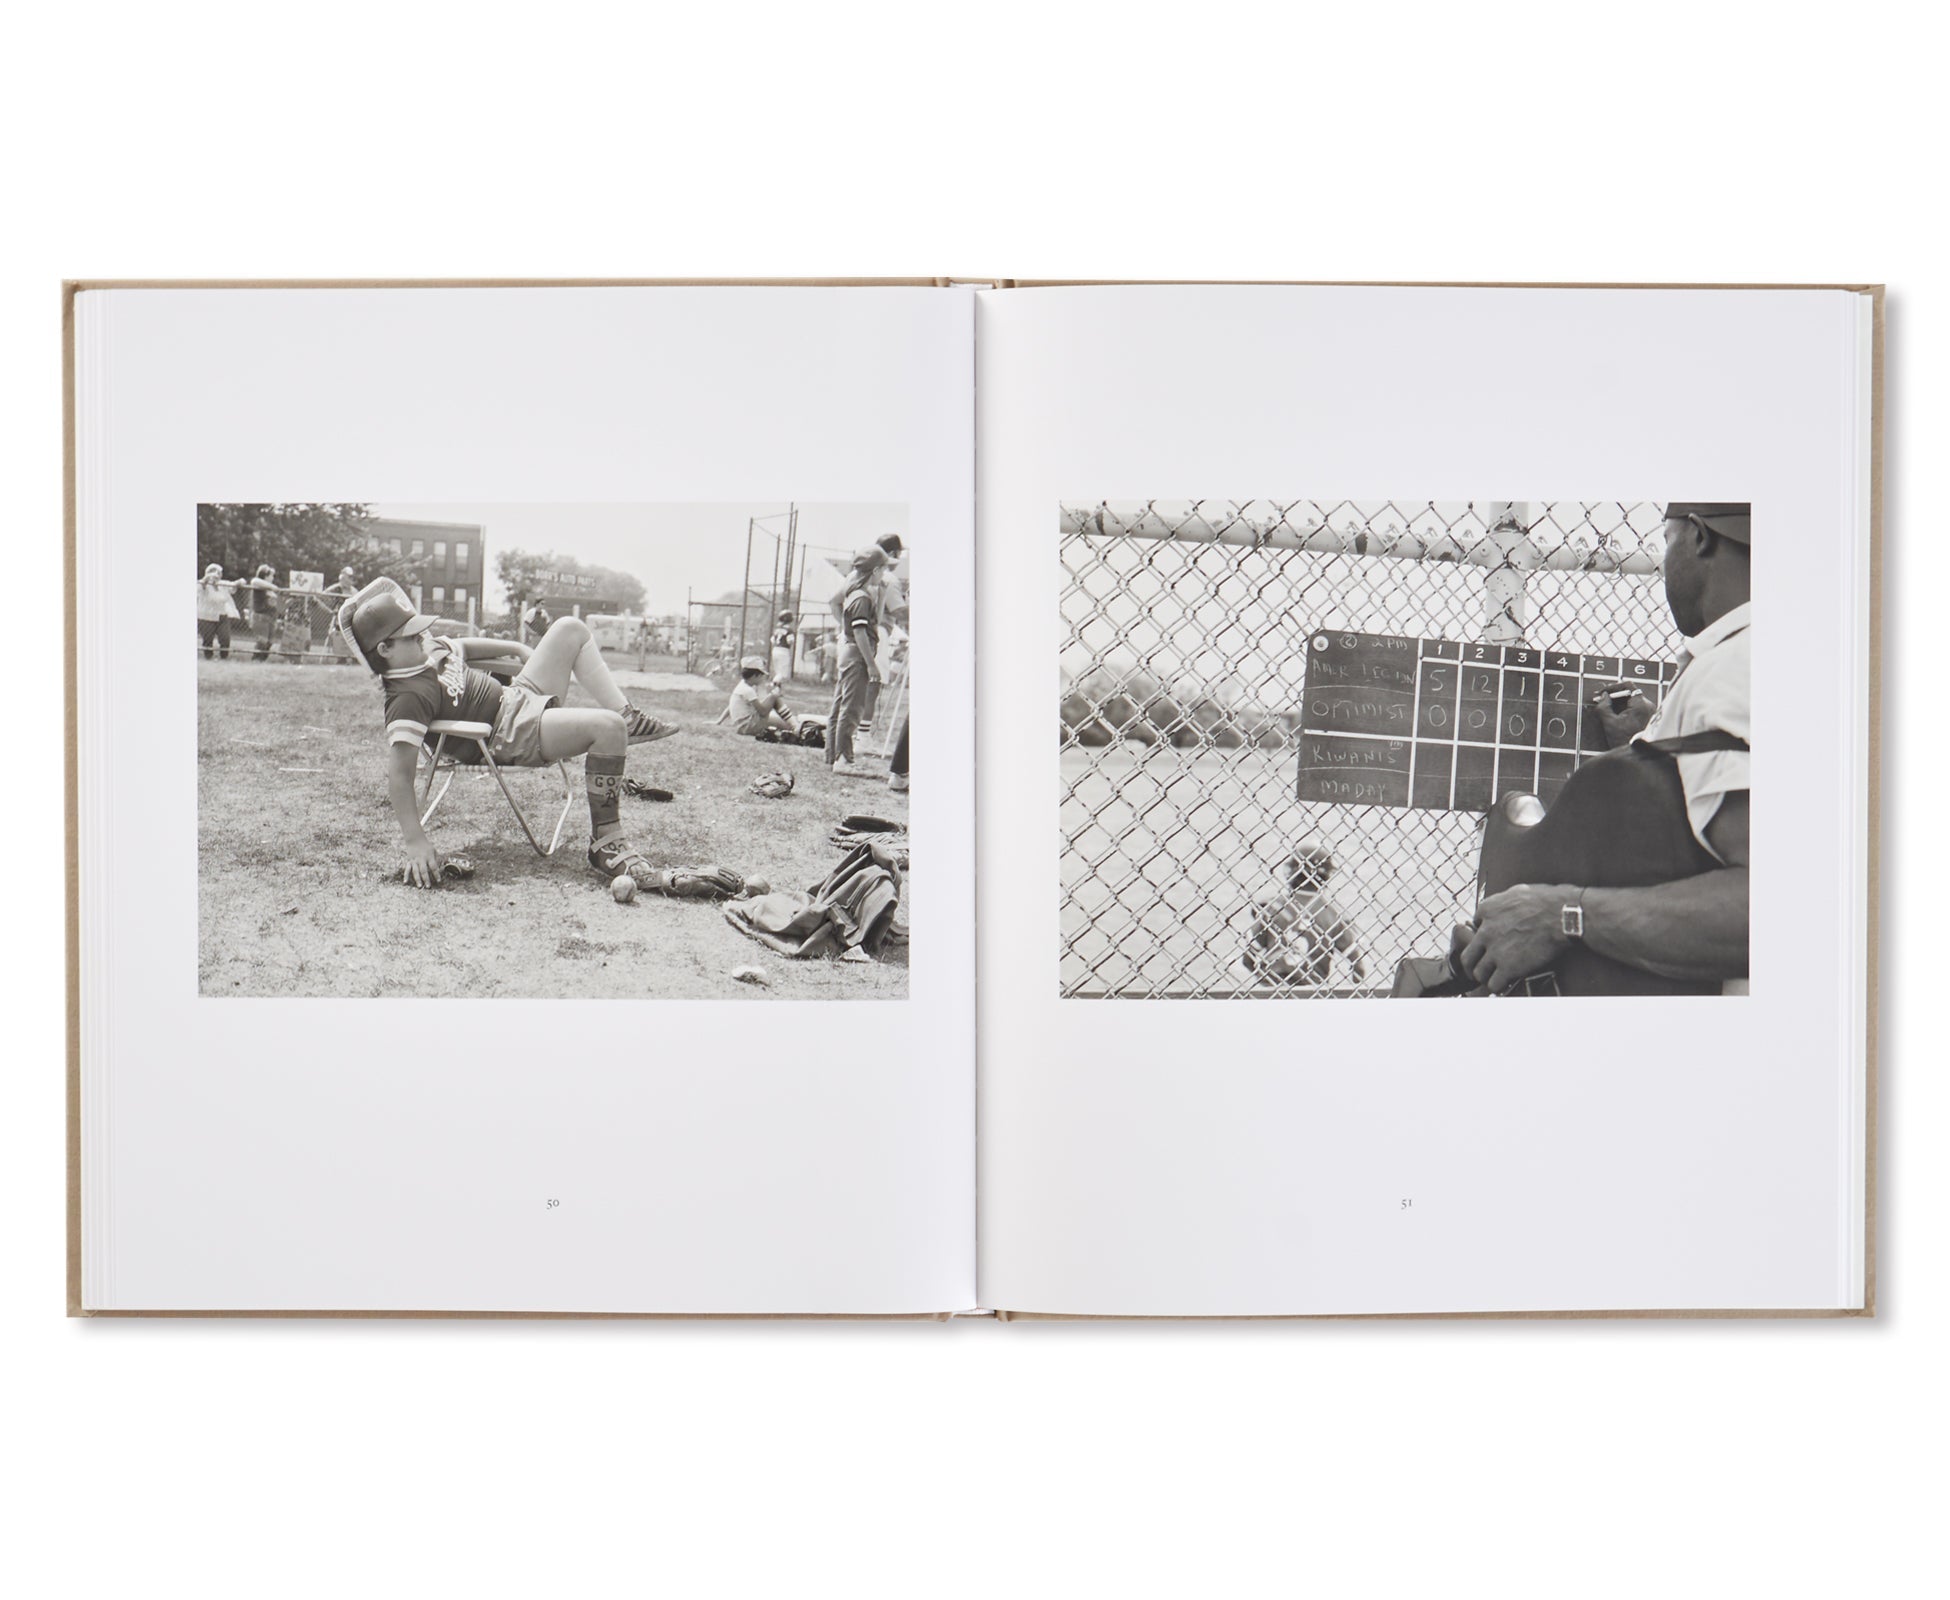 THE PLAYERS by Mark Steinmetz [FIRST EDITION / SIGNED]